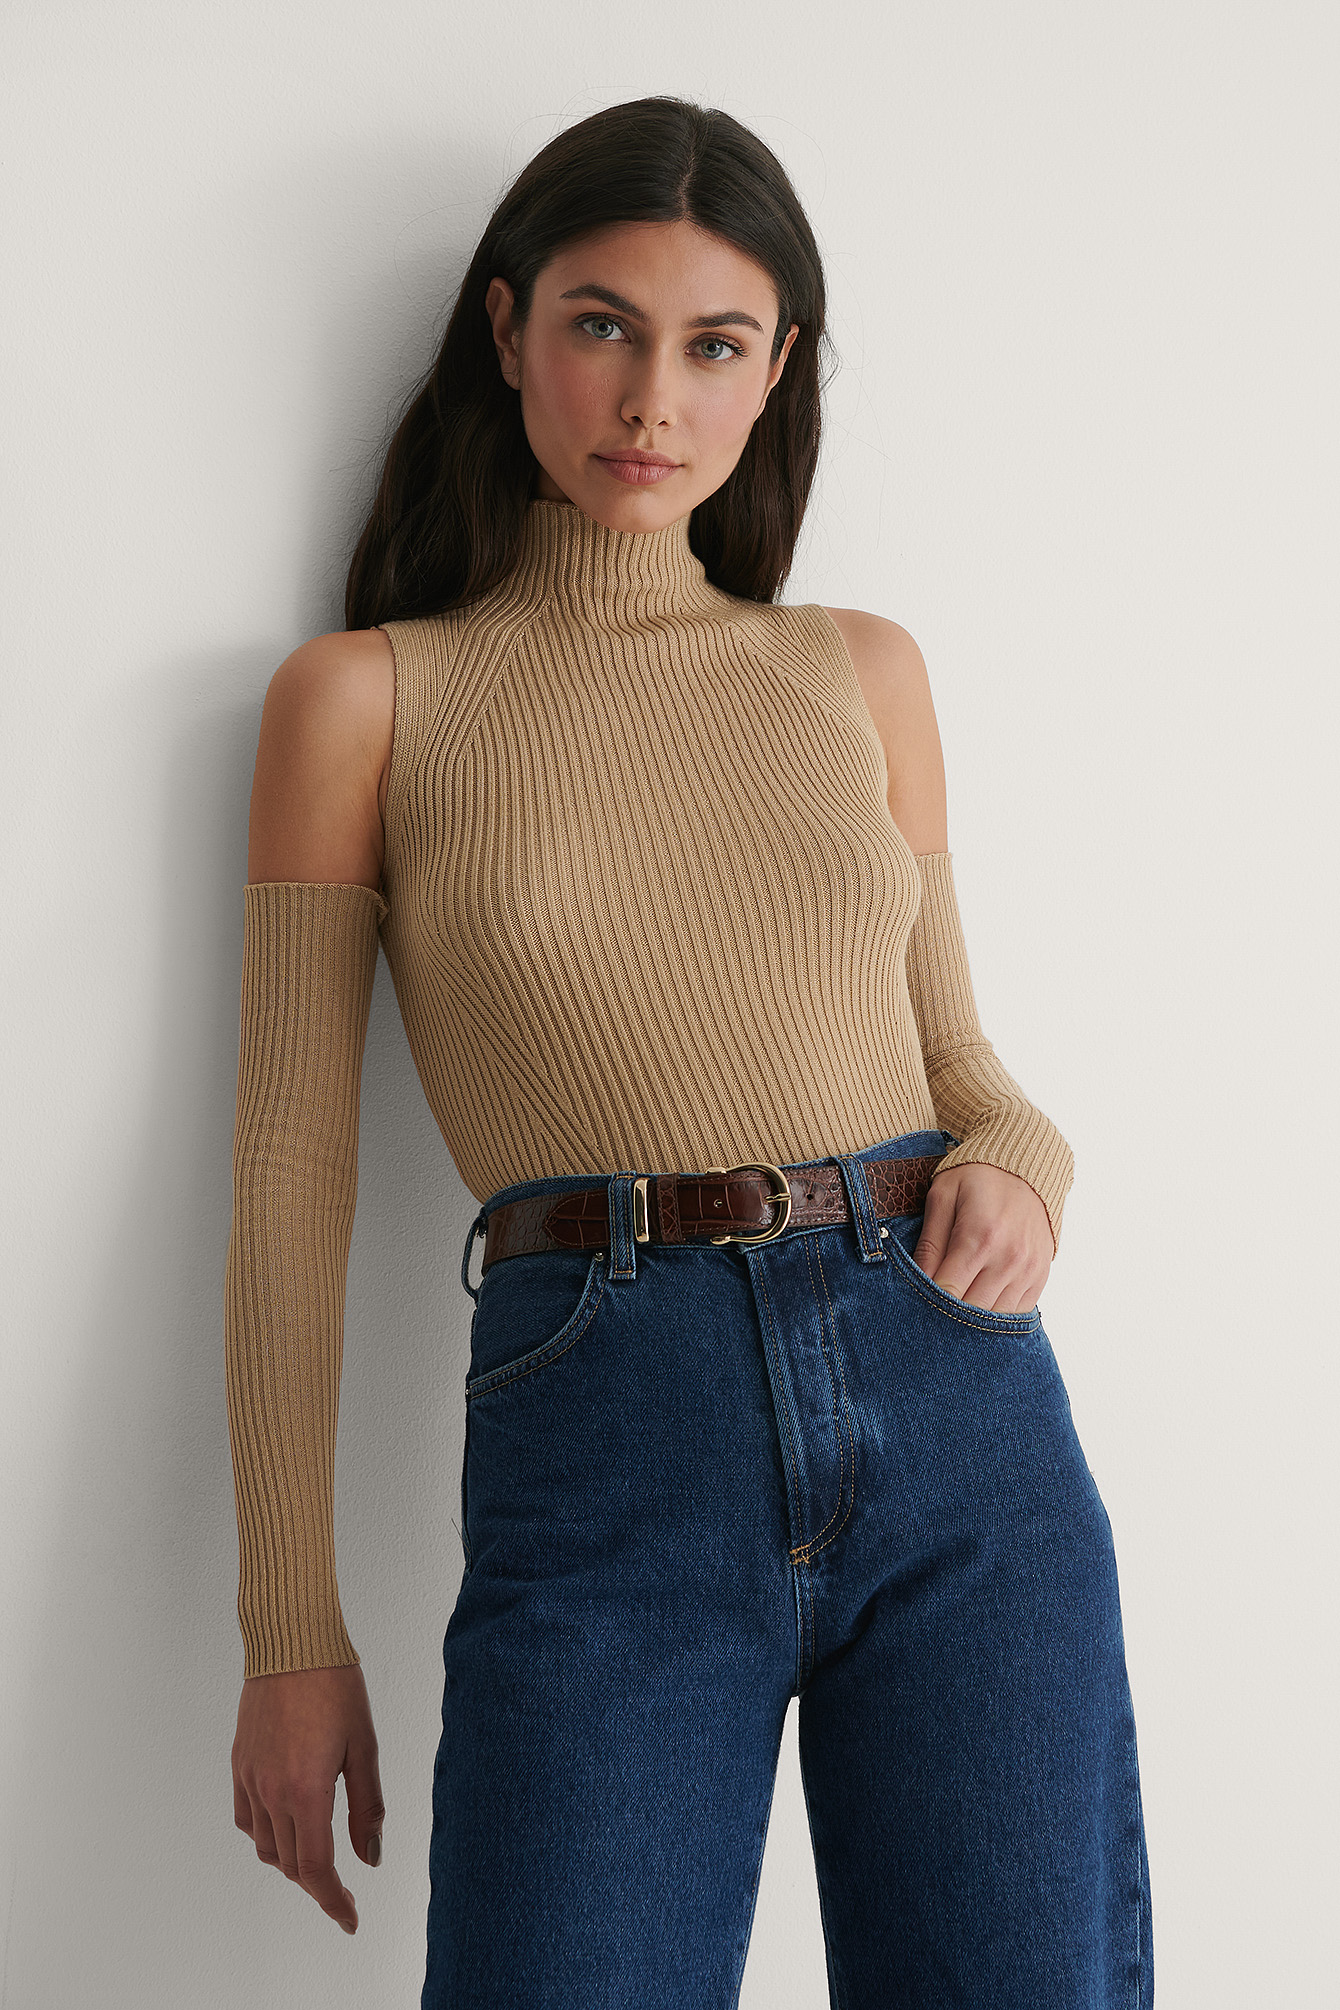 No Shoulder Knit Sweater Outfit.